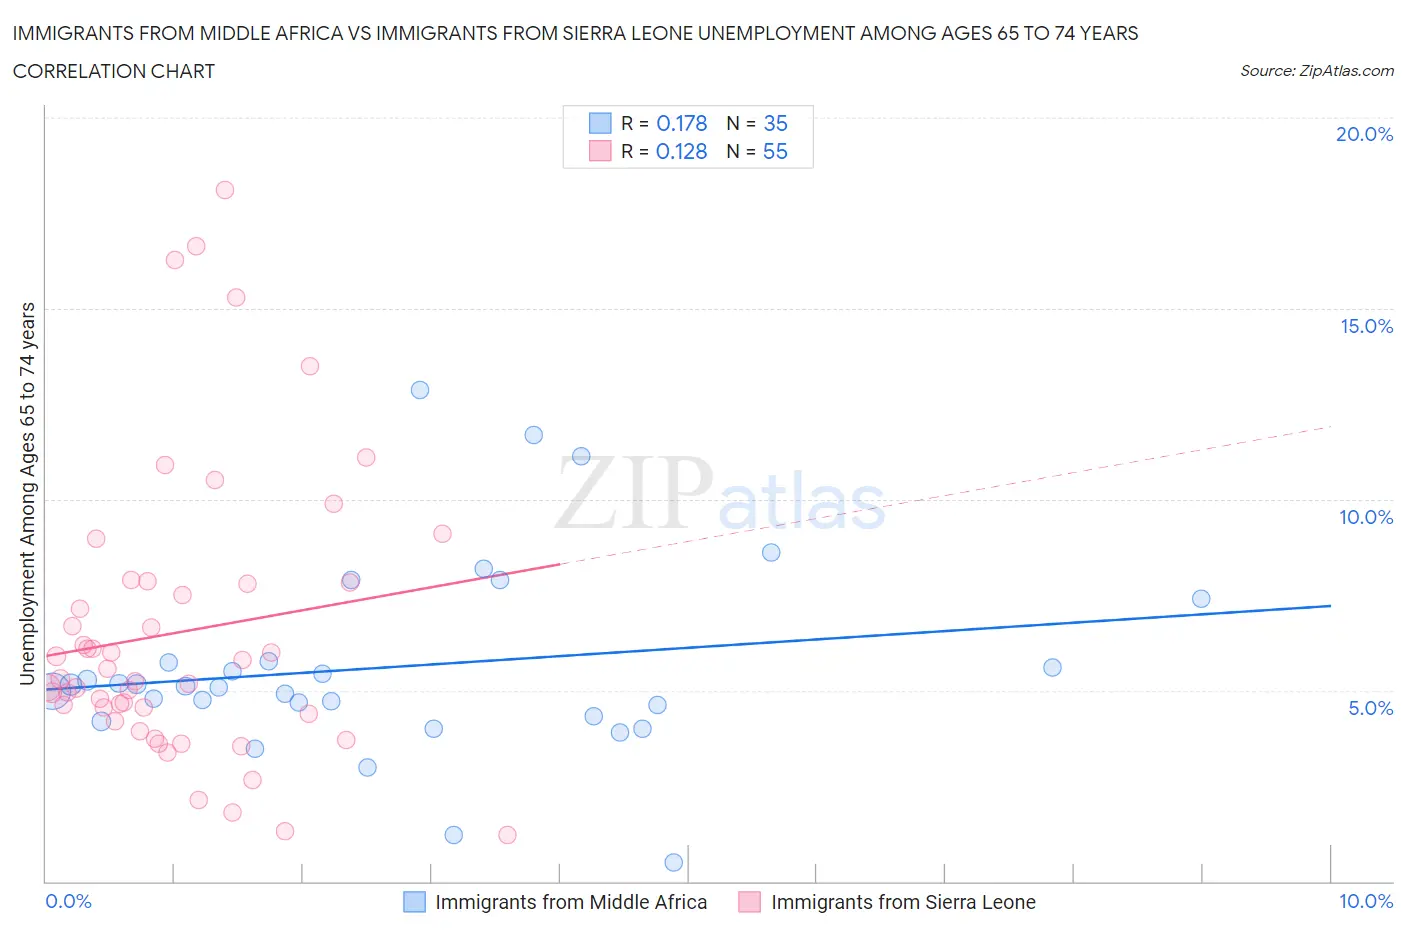 Immigrants from Middle Africa vs Immigrants from Sierra Leone Unemployment Among Ages 65 to 74 years